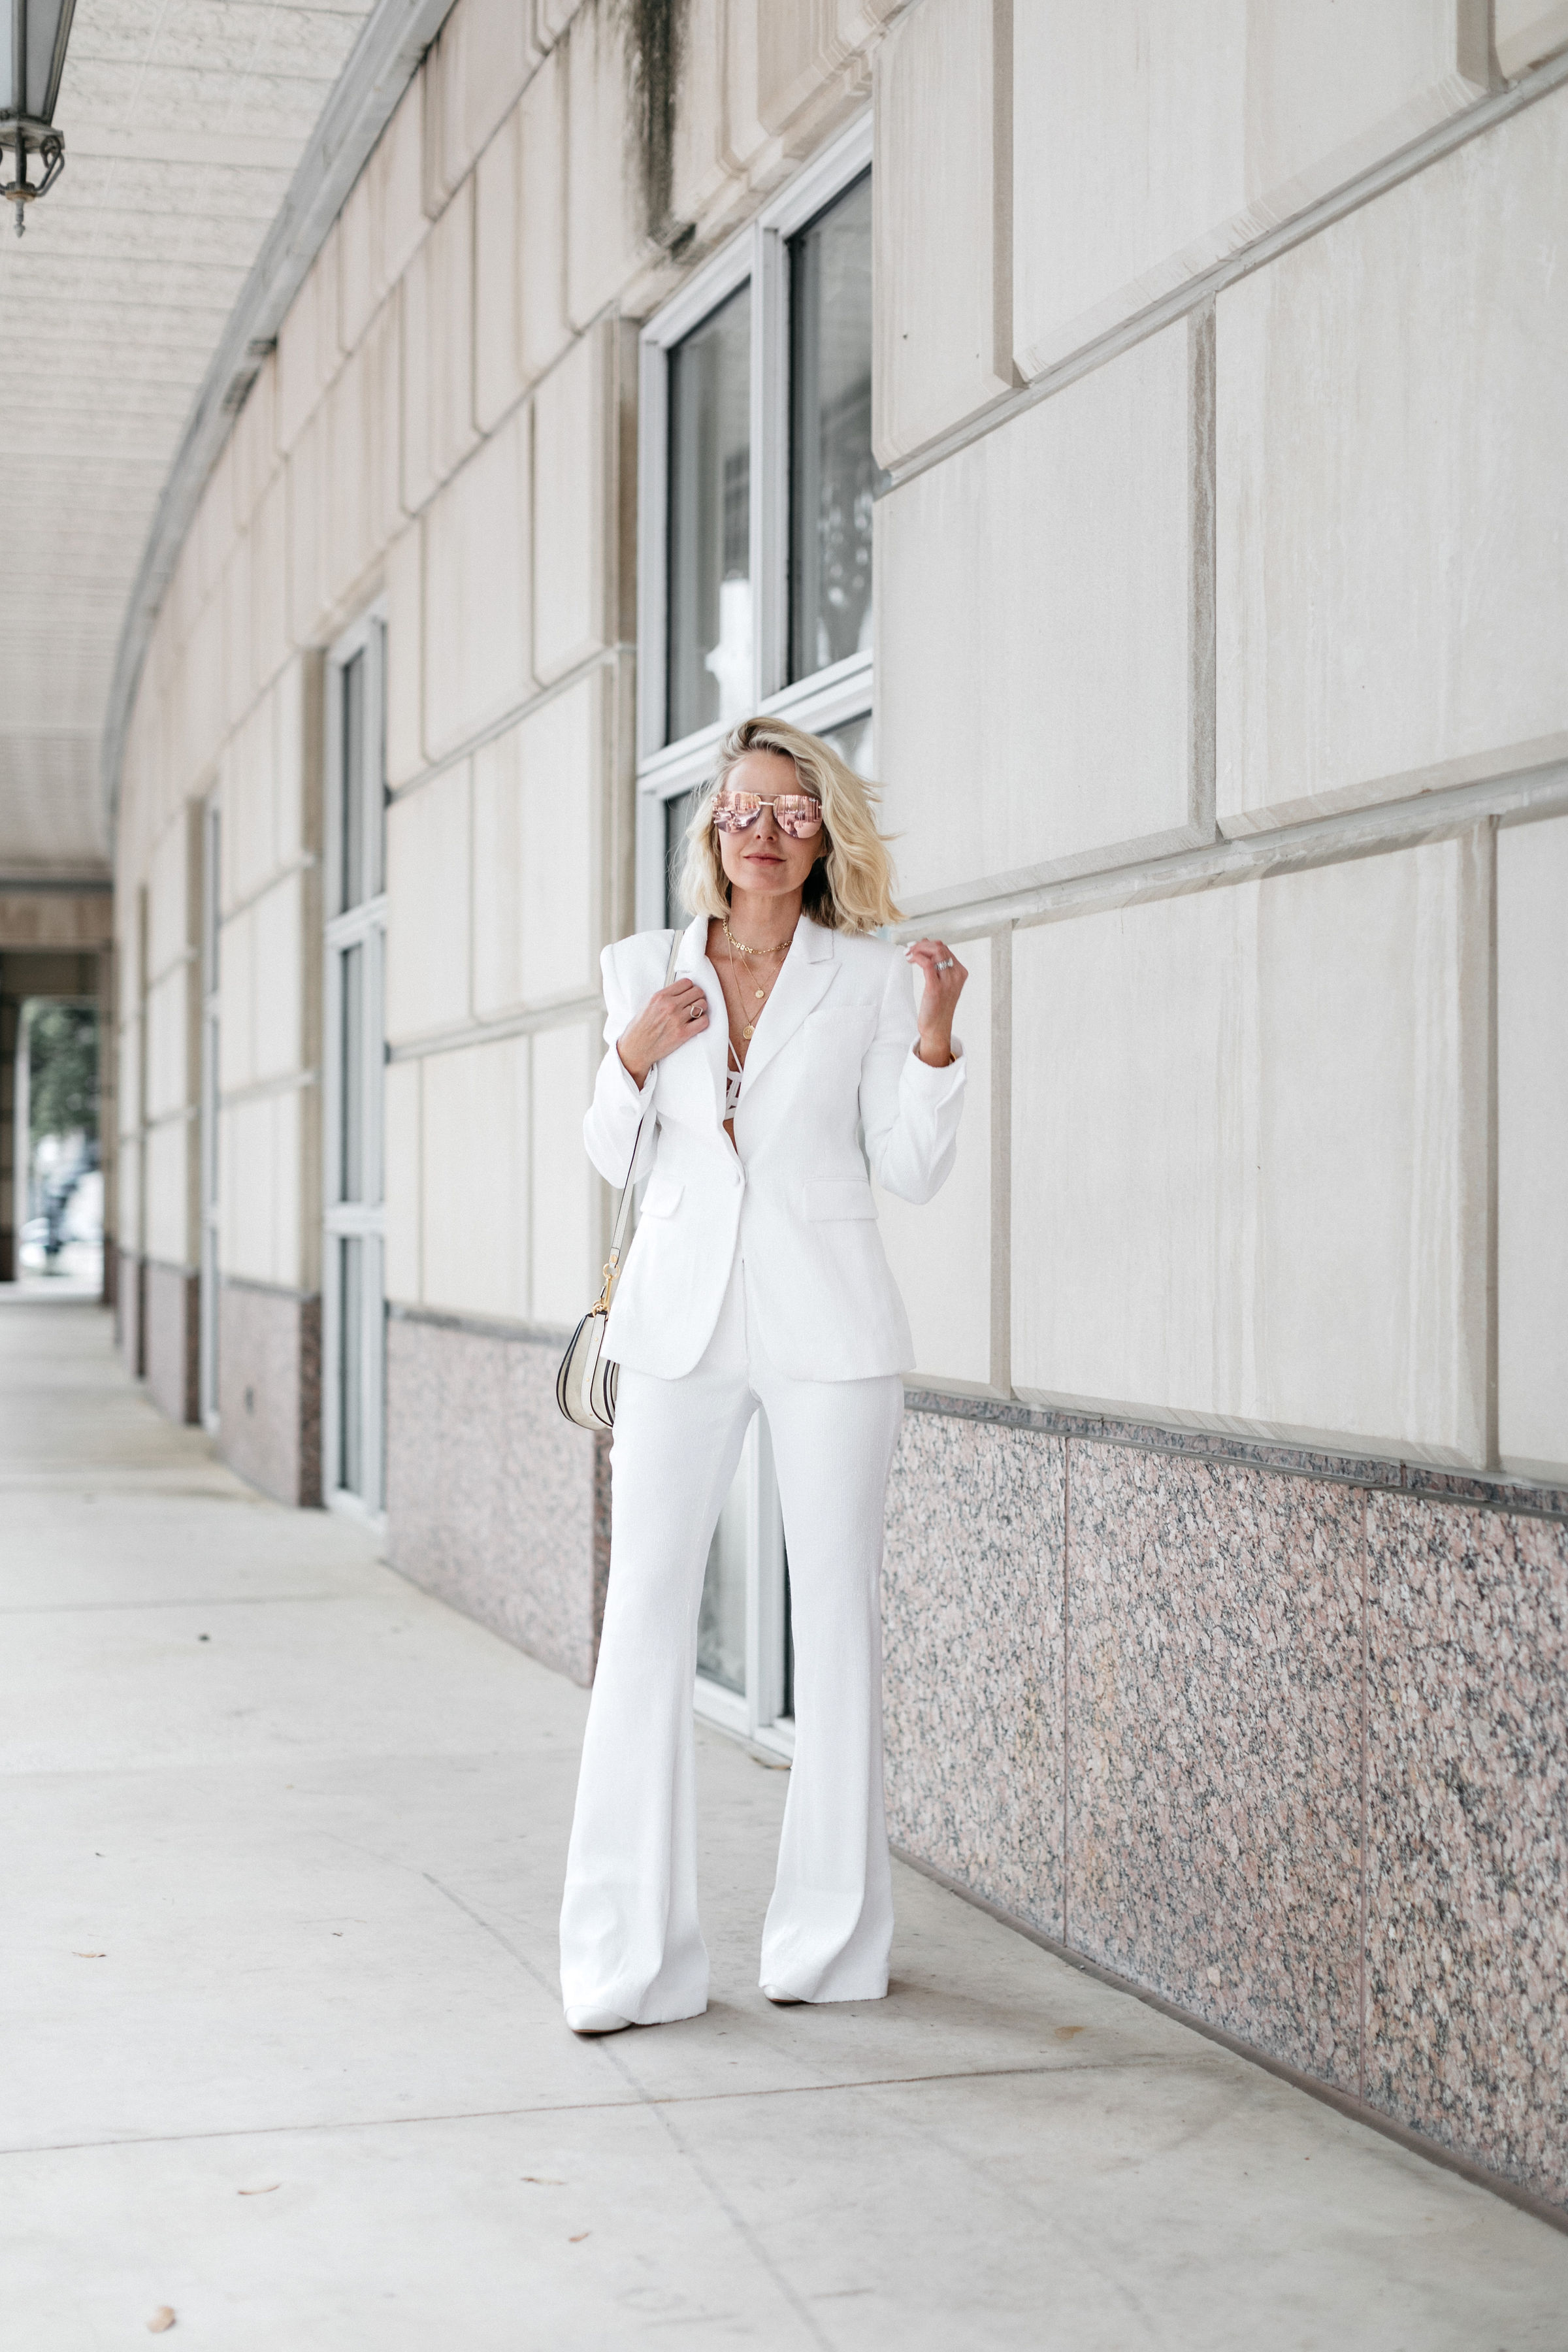 Reward Style Conference 2019, Fashion blogger Erin Busbee of BusbeeStyle.com wearing a white sequin Rachel Zoe pants and blazer in Dallas, Texas